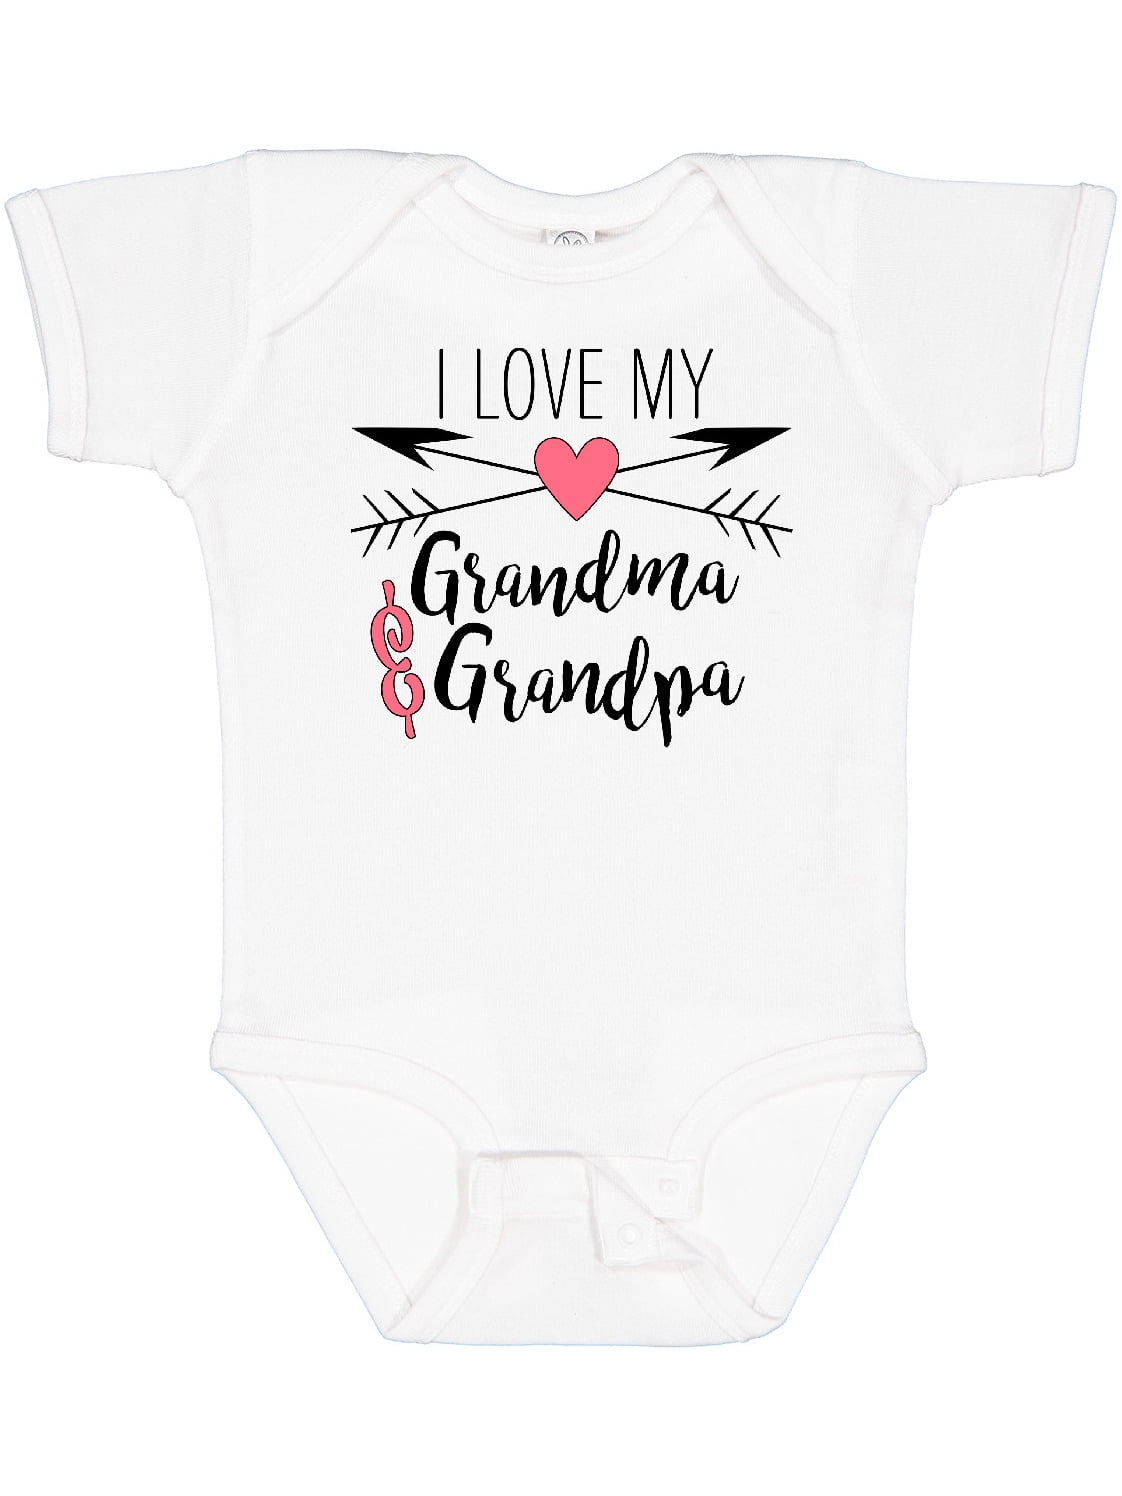 I Love My Granny & Grandad This Much Cute Funny Heart Baby Grow Body Suit Vest 